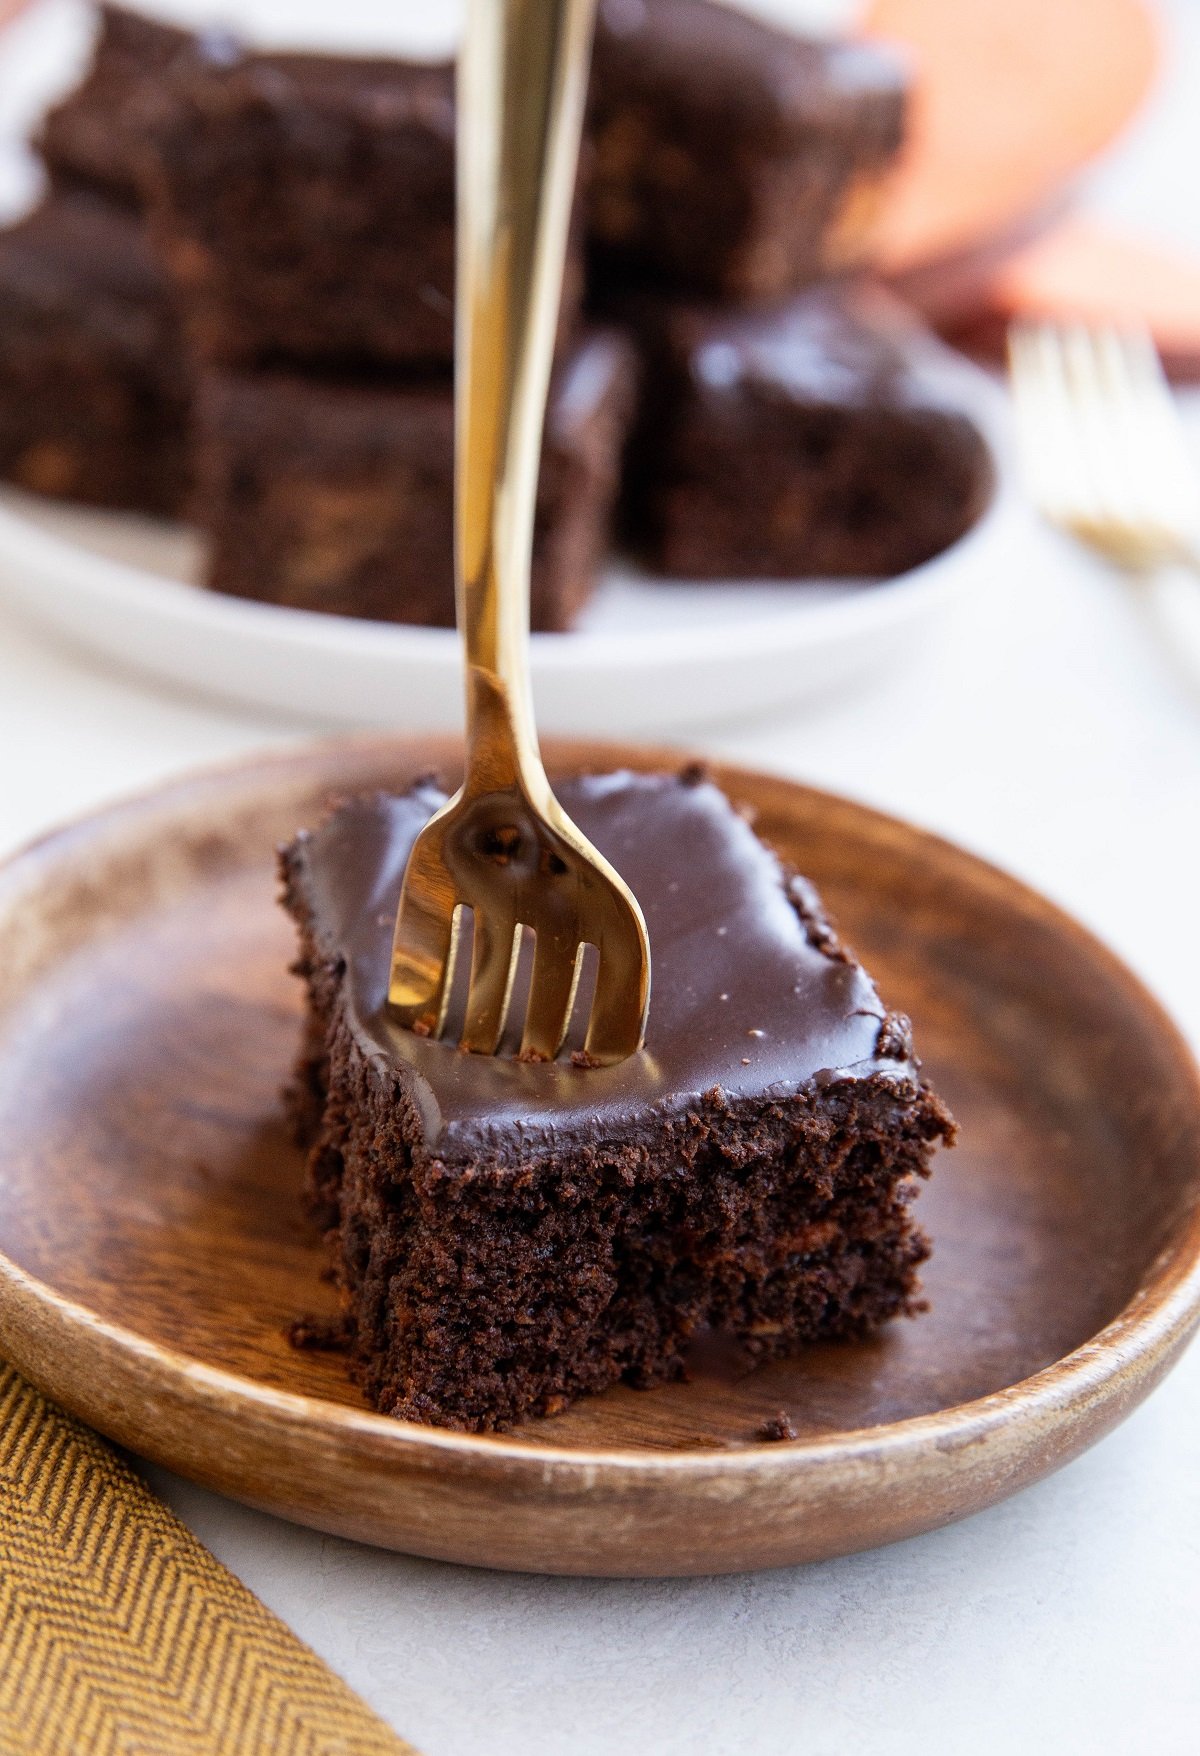 Slice of chocolate cake on a plate with a gold fork about to take a bite.